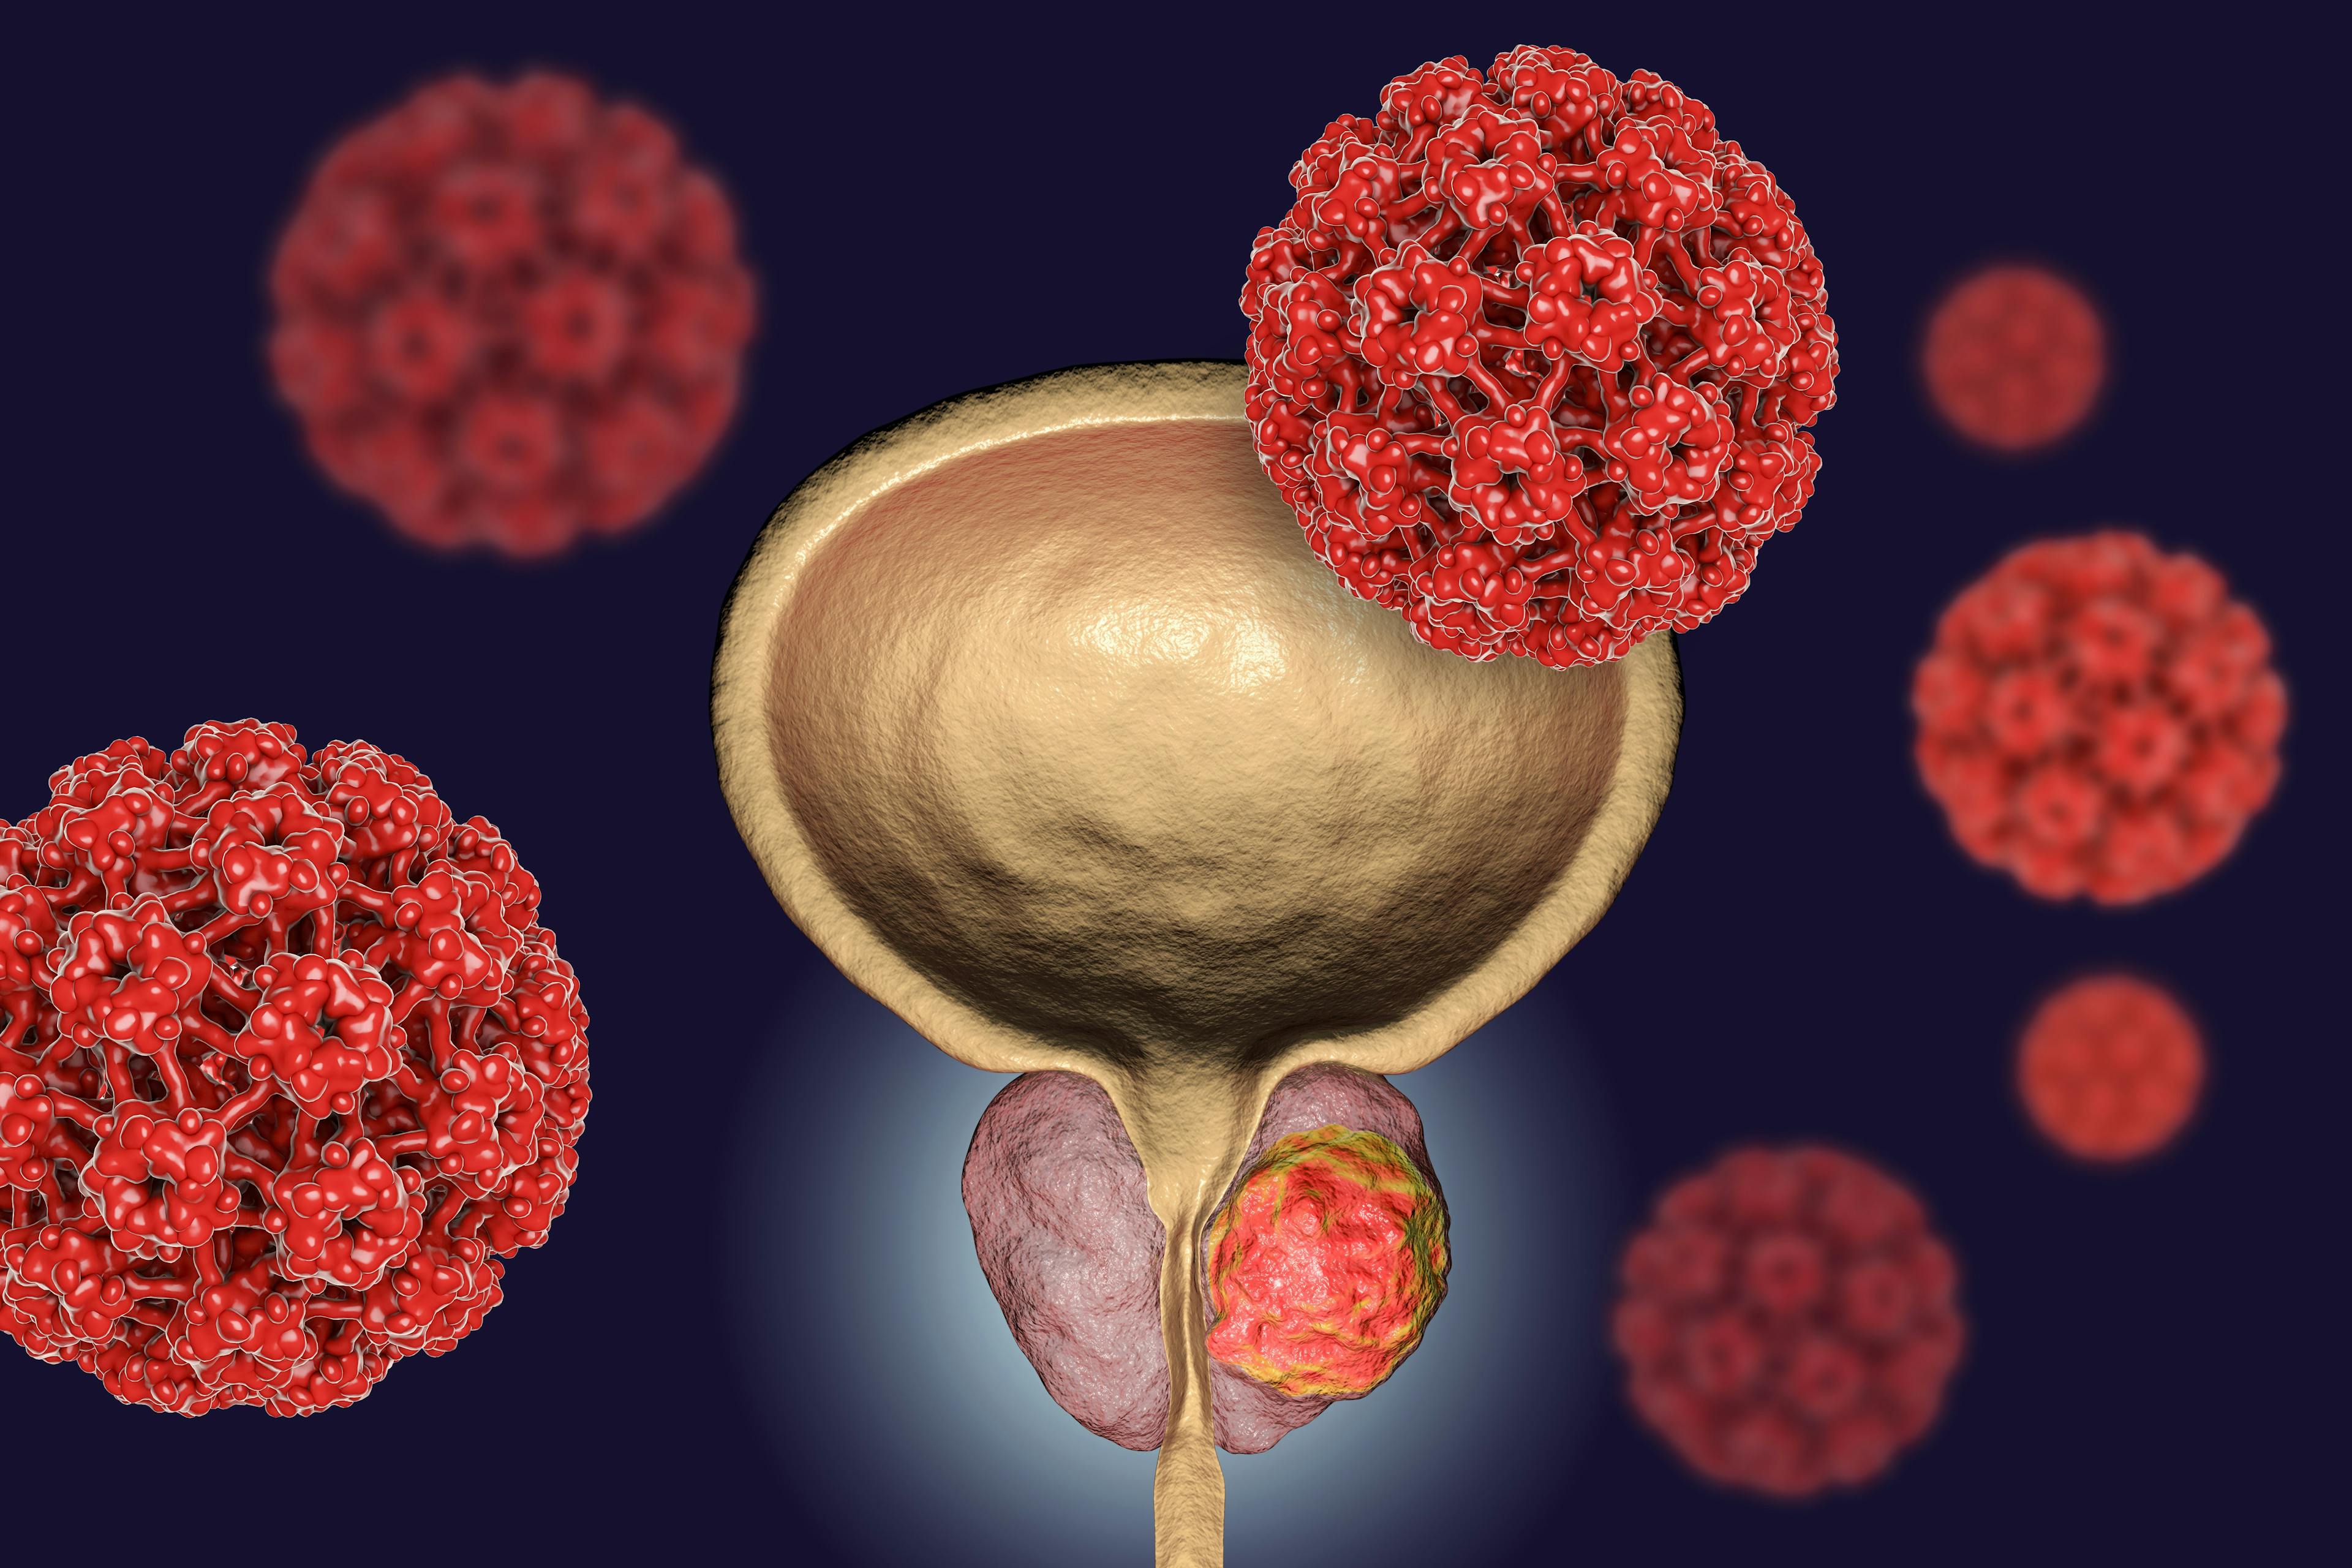 ATLAS Trial Confirms Radiotherapy Can Be Combined with Next-Gen Hormonal Therapy in Phase 3 Studies of HRLPC Treatments